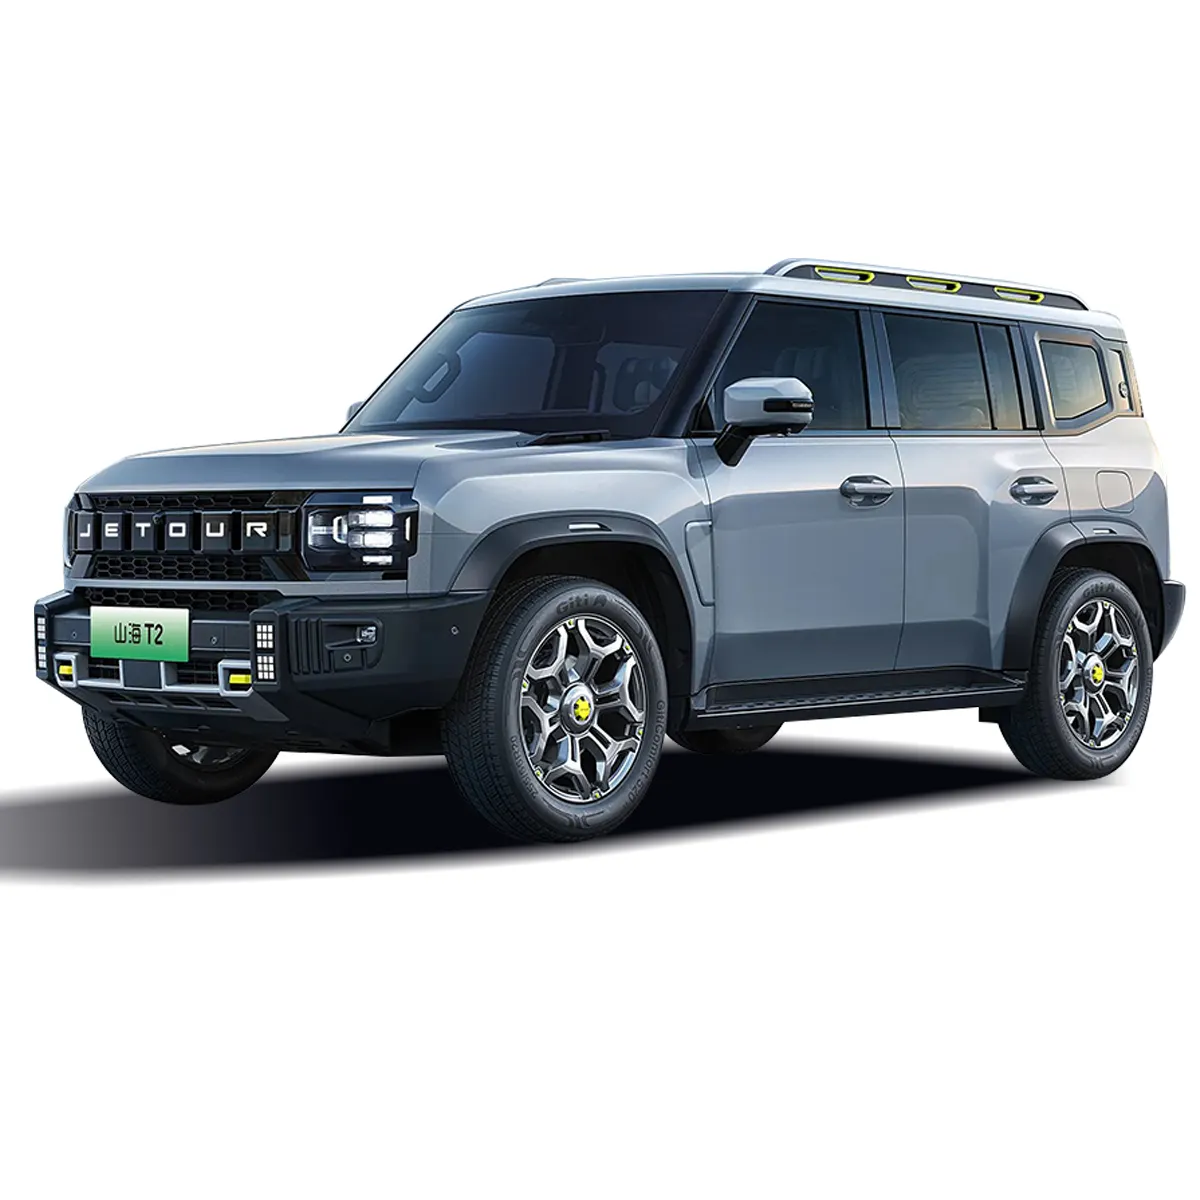 2024 PHEV Twin-motor plug-in hybrid suv jetour T2 New Energy 4WD Off-Road Vehicle new cars